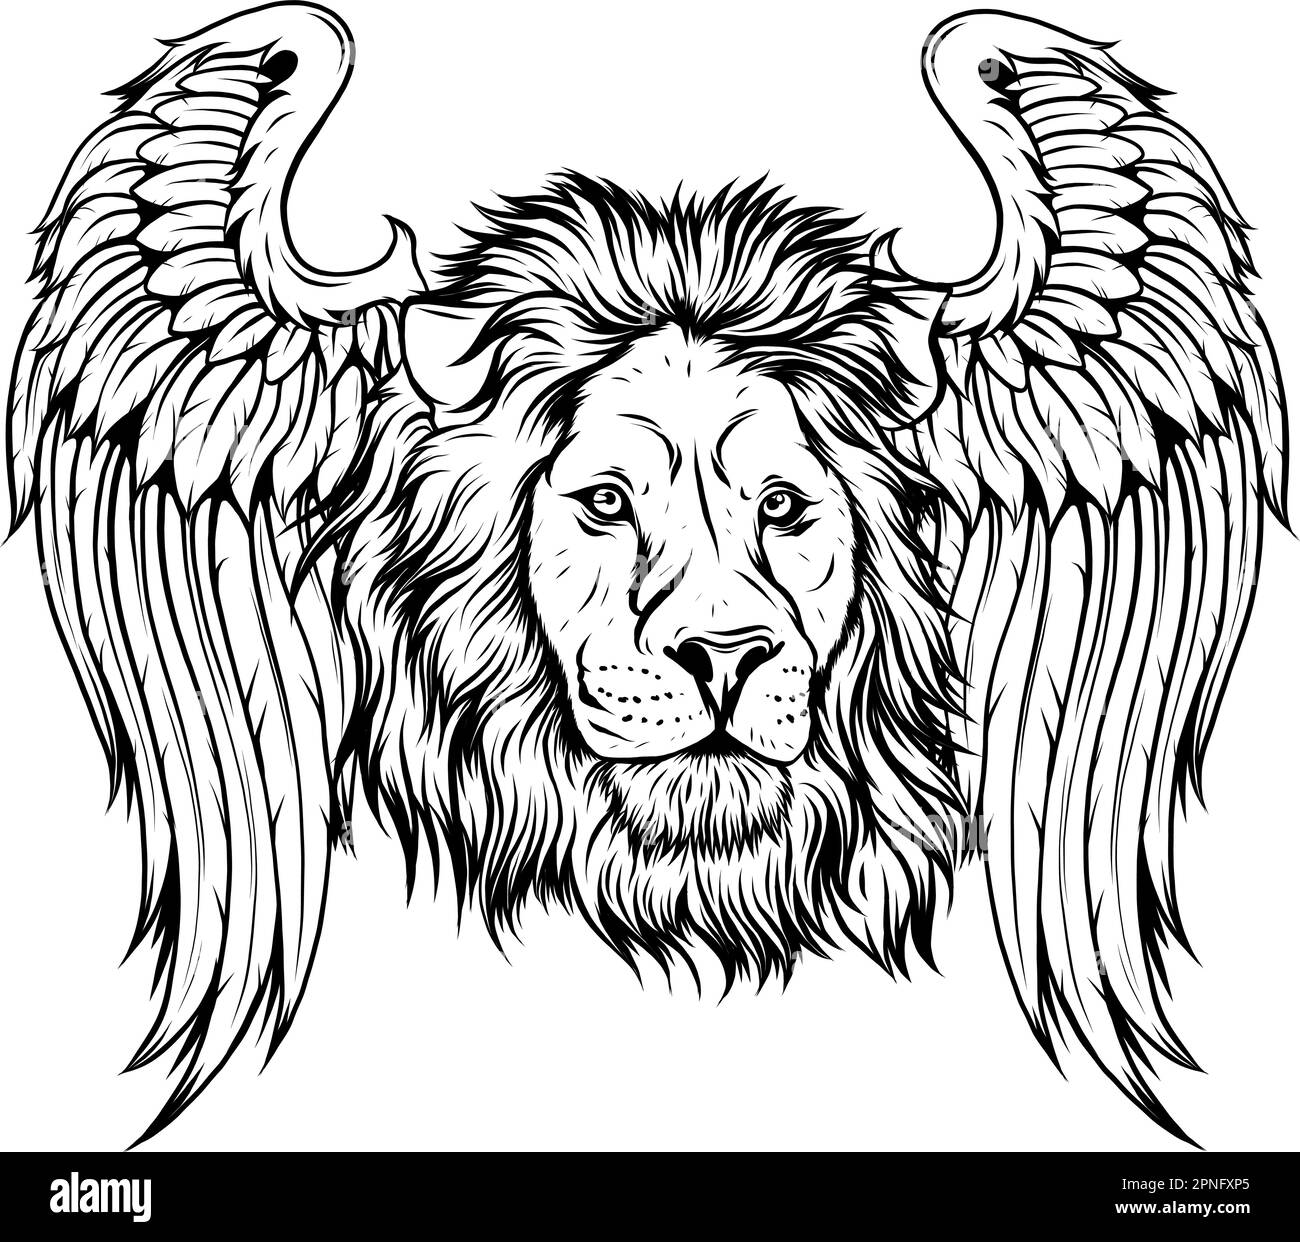 mythical winged lion vector illustration monochrome draw Stock Vector